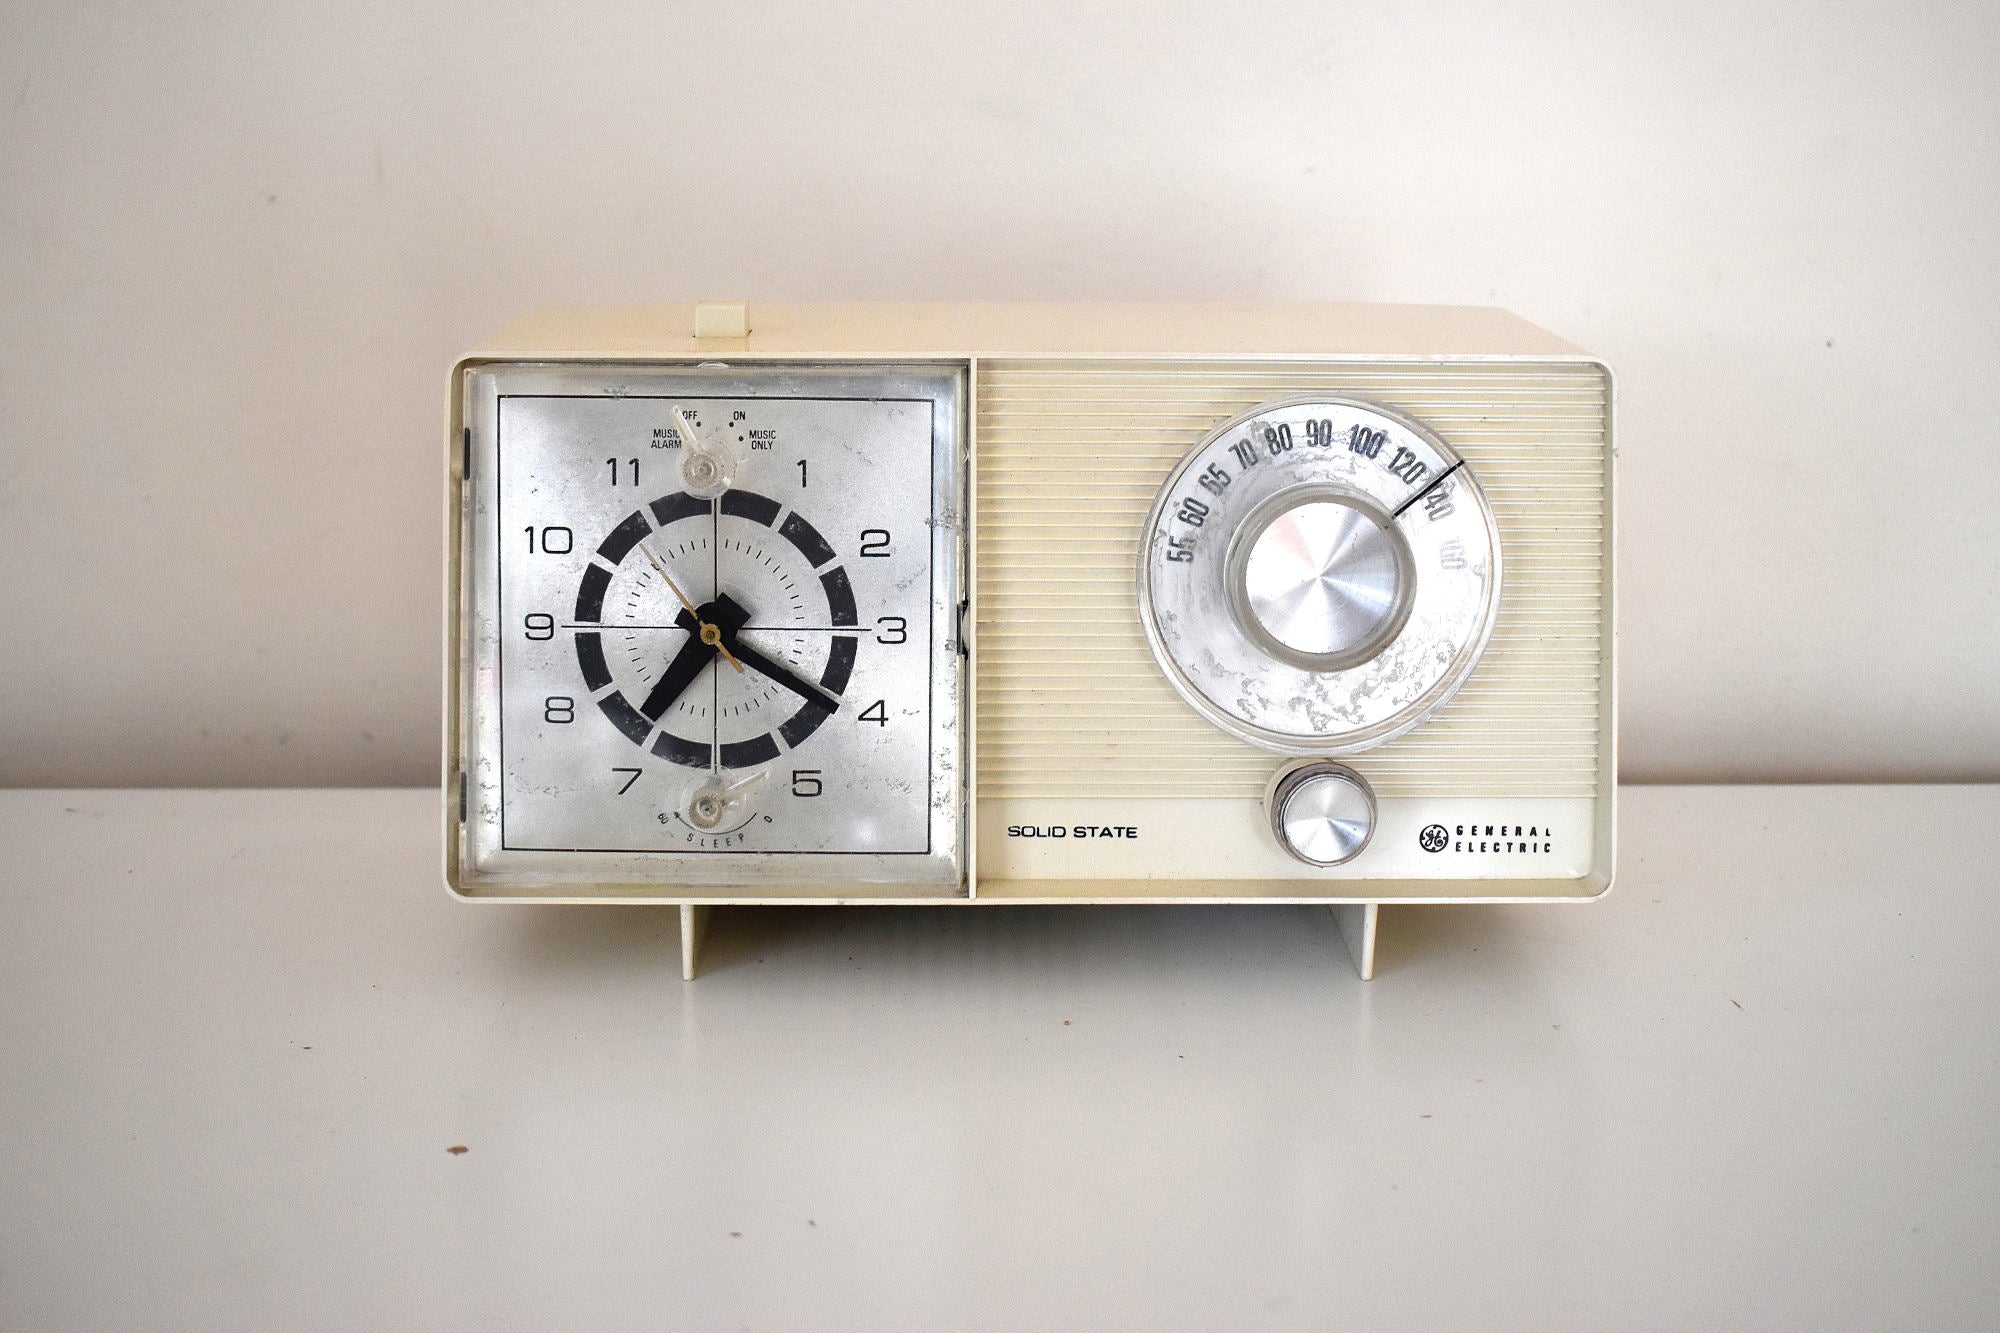 Bluetooth Ready To Go - Ivory White 1966 General Electric Model C-403D ...